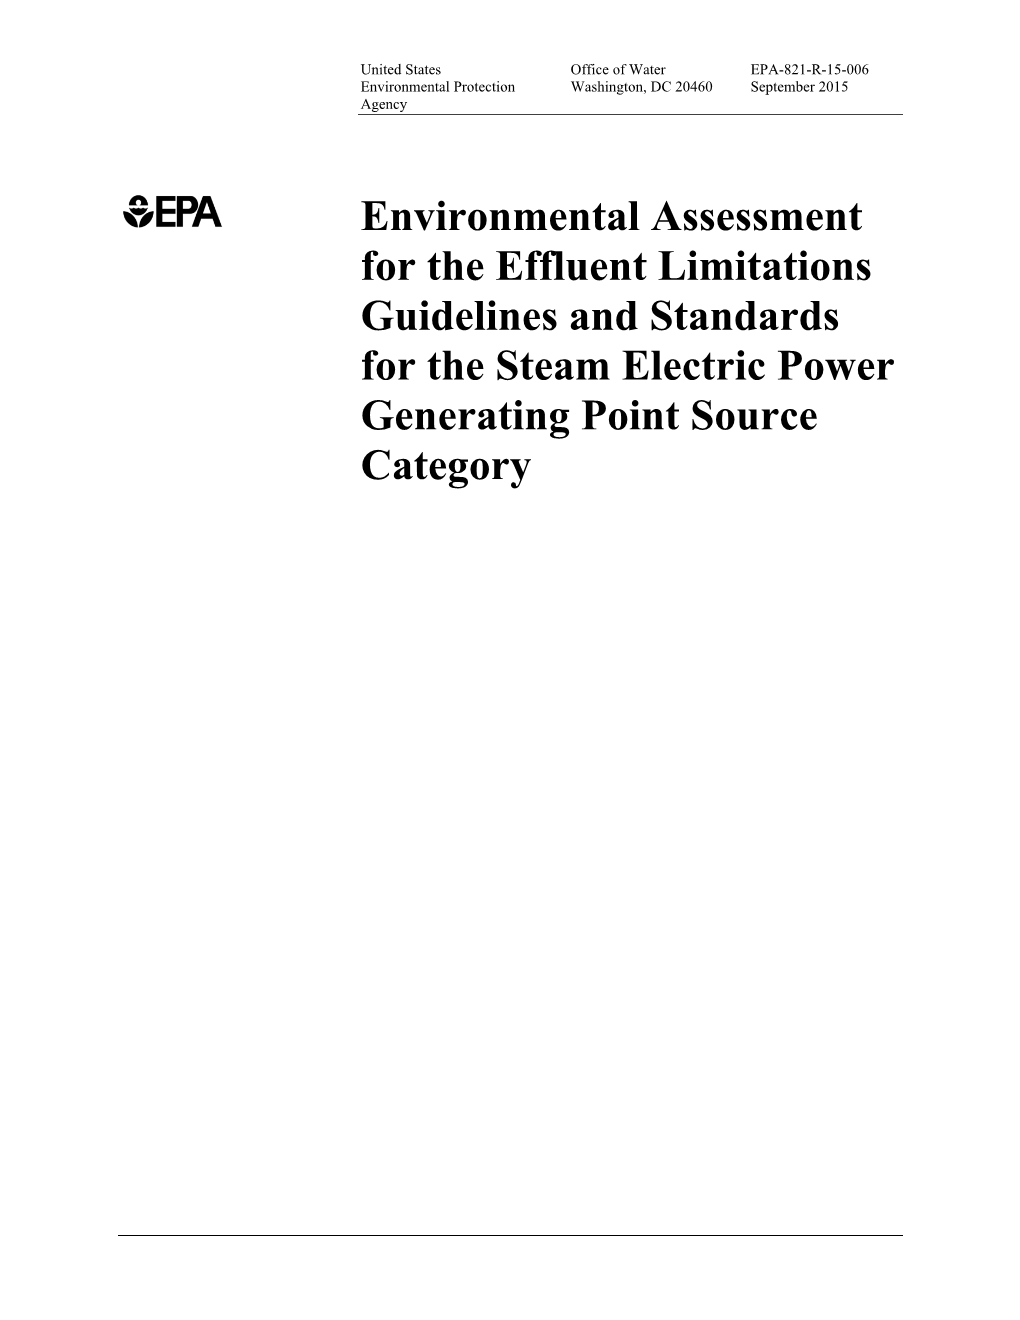 Environmental Assessment for the Effluent Limitations Guidelines and Standards for the Steam Electric Power Generating Point Source Category